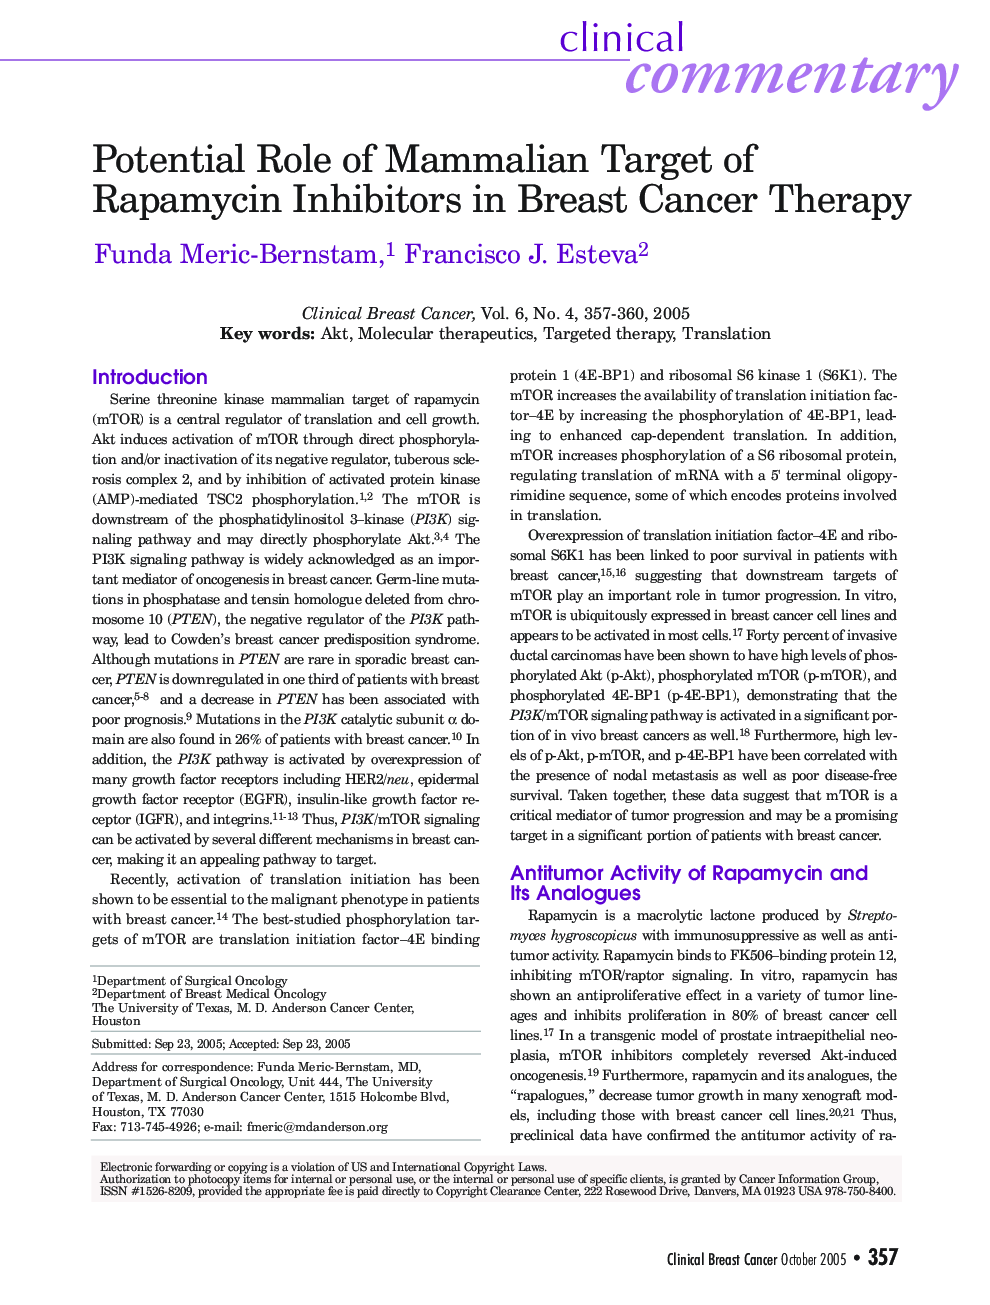 Potential Role of Mammalian Target of Rapamycin Inhibitors in Breast Cancer Therapy